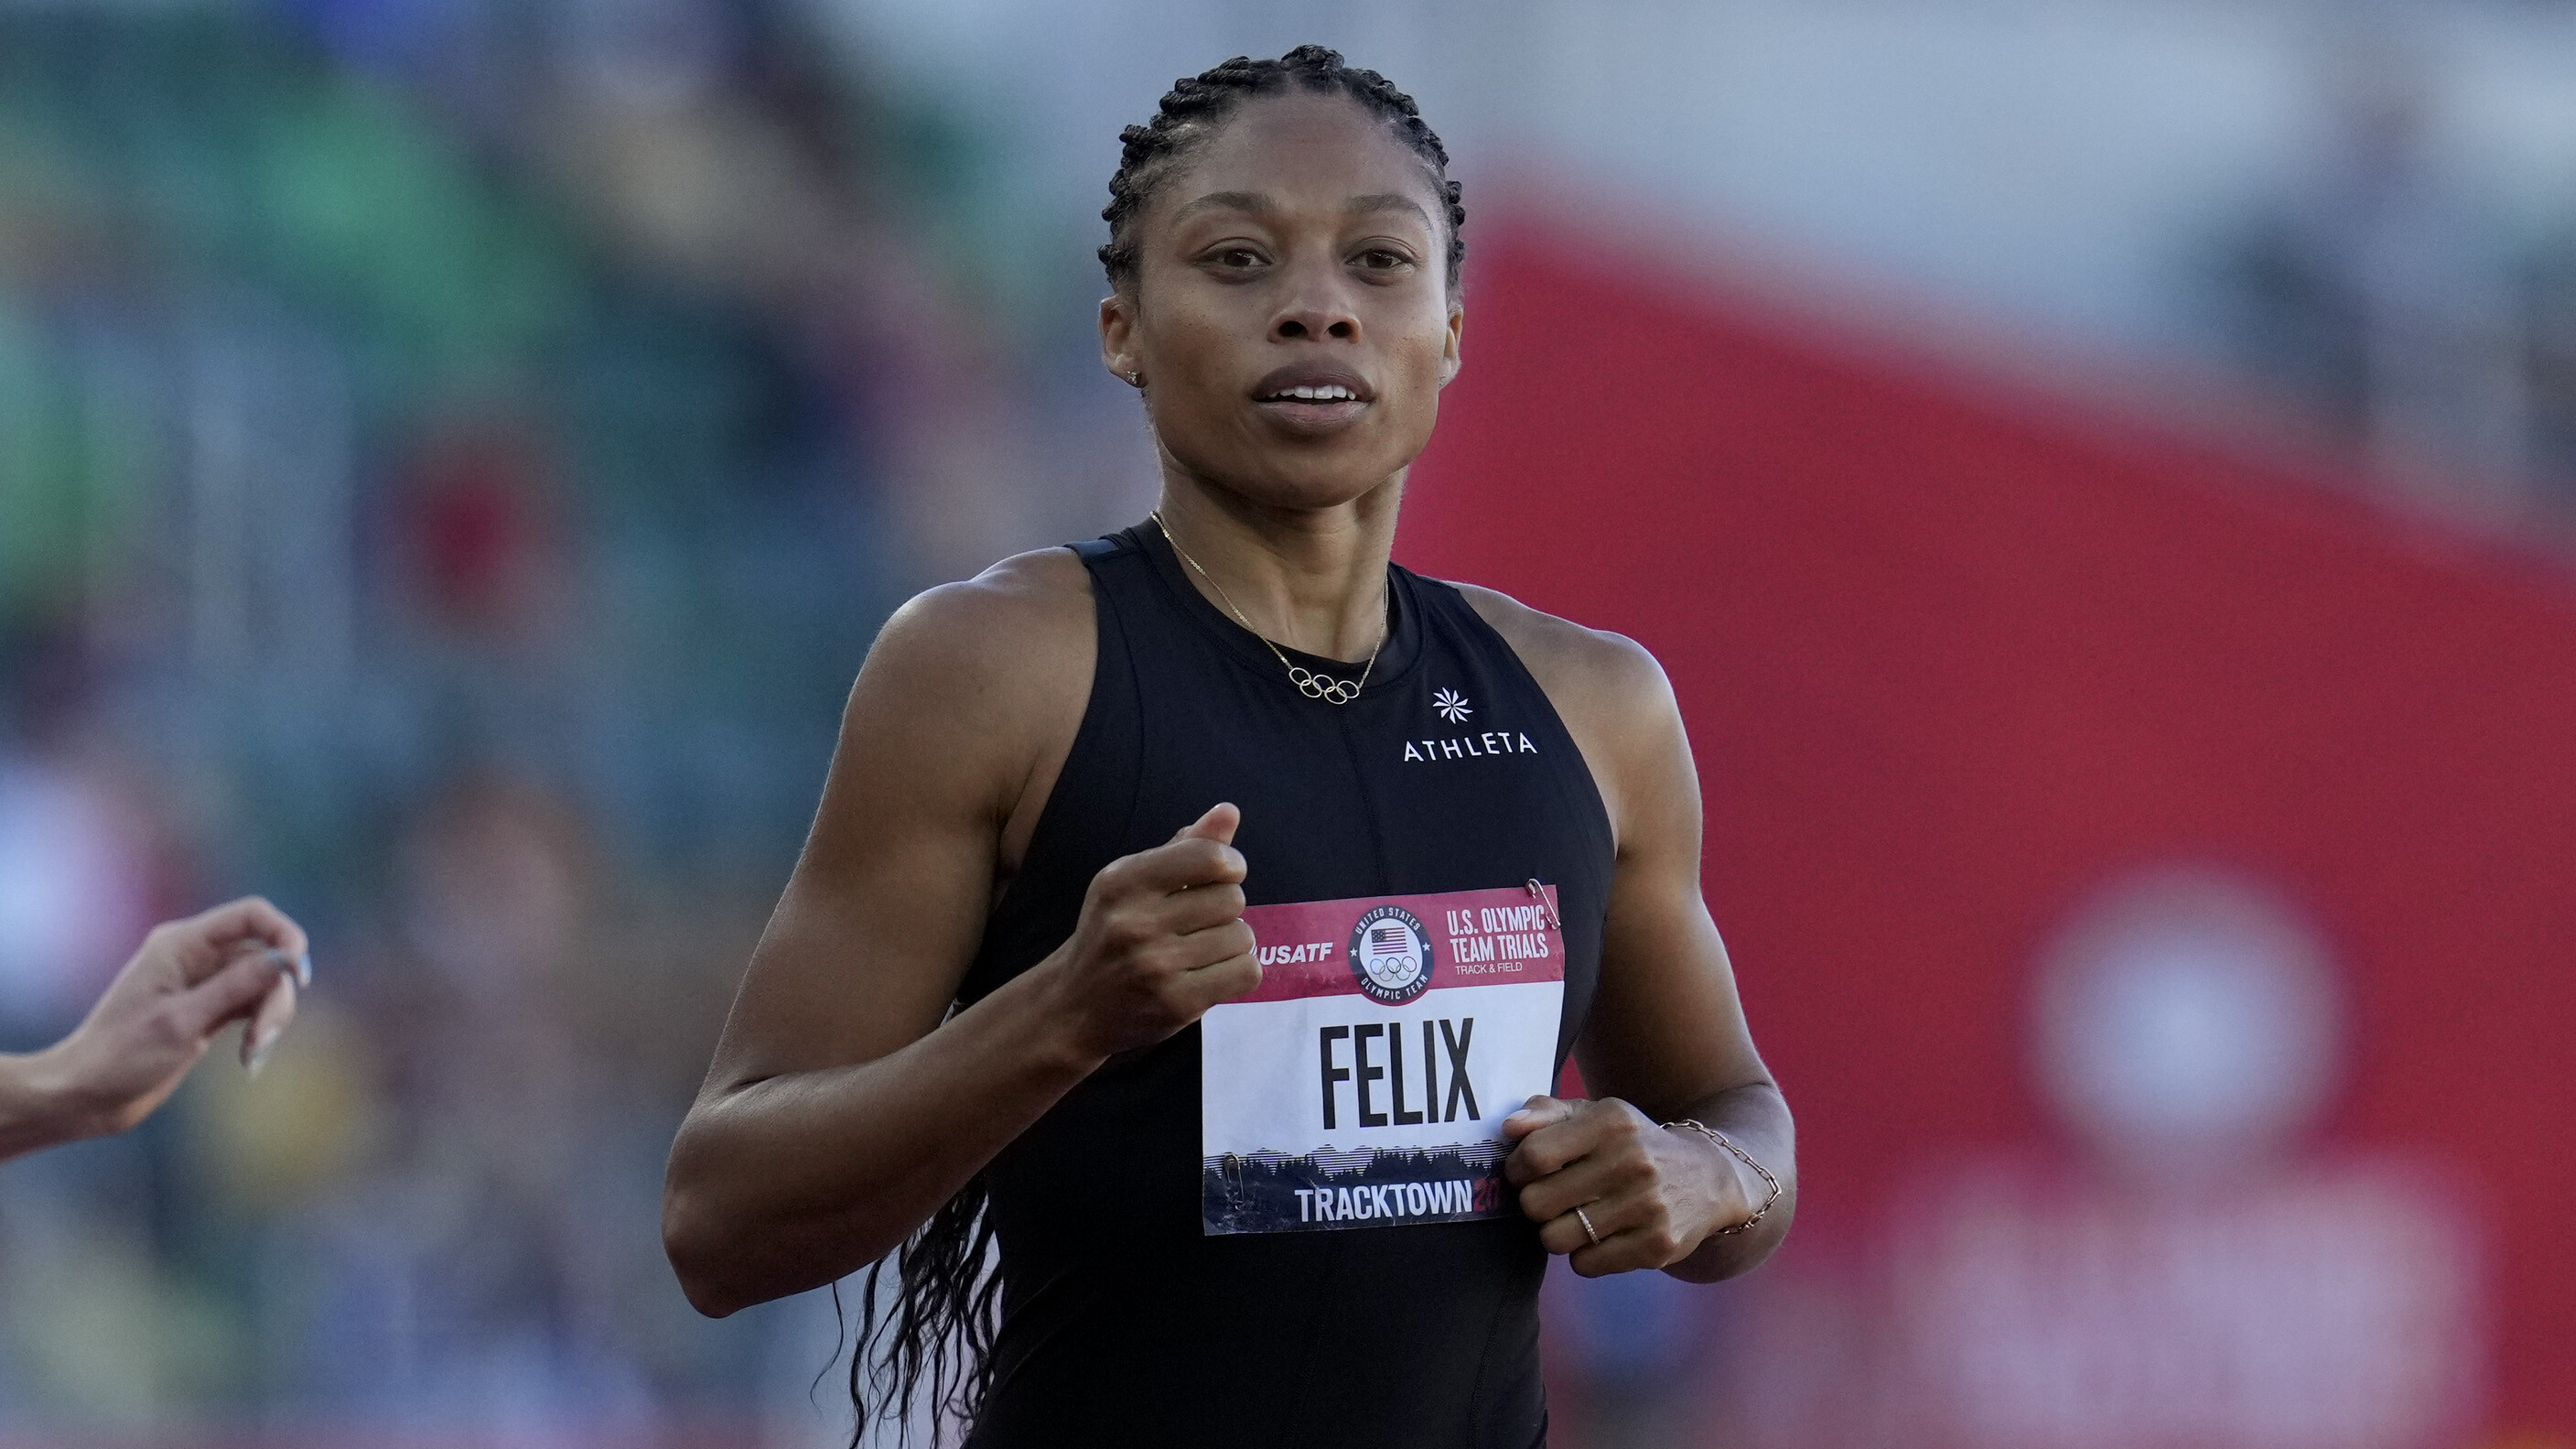 Allyson Felix: The 2015 world champion at 400 meters, Trial. 2820x1590 HD Wallpaper.